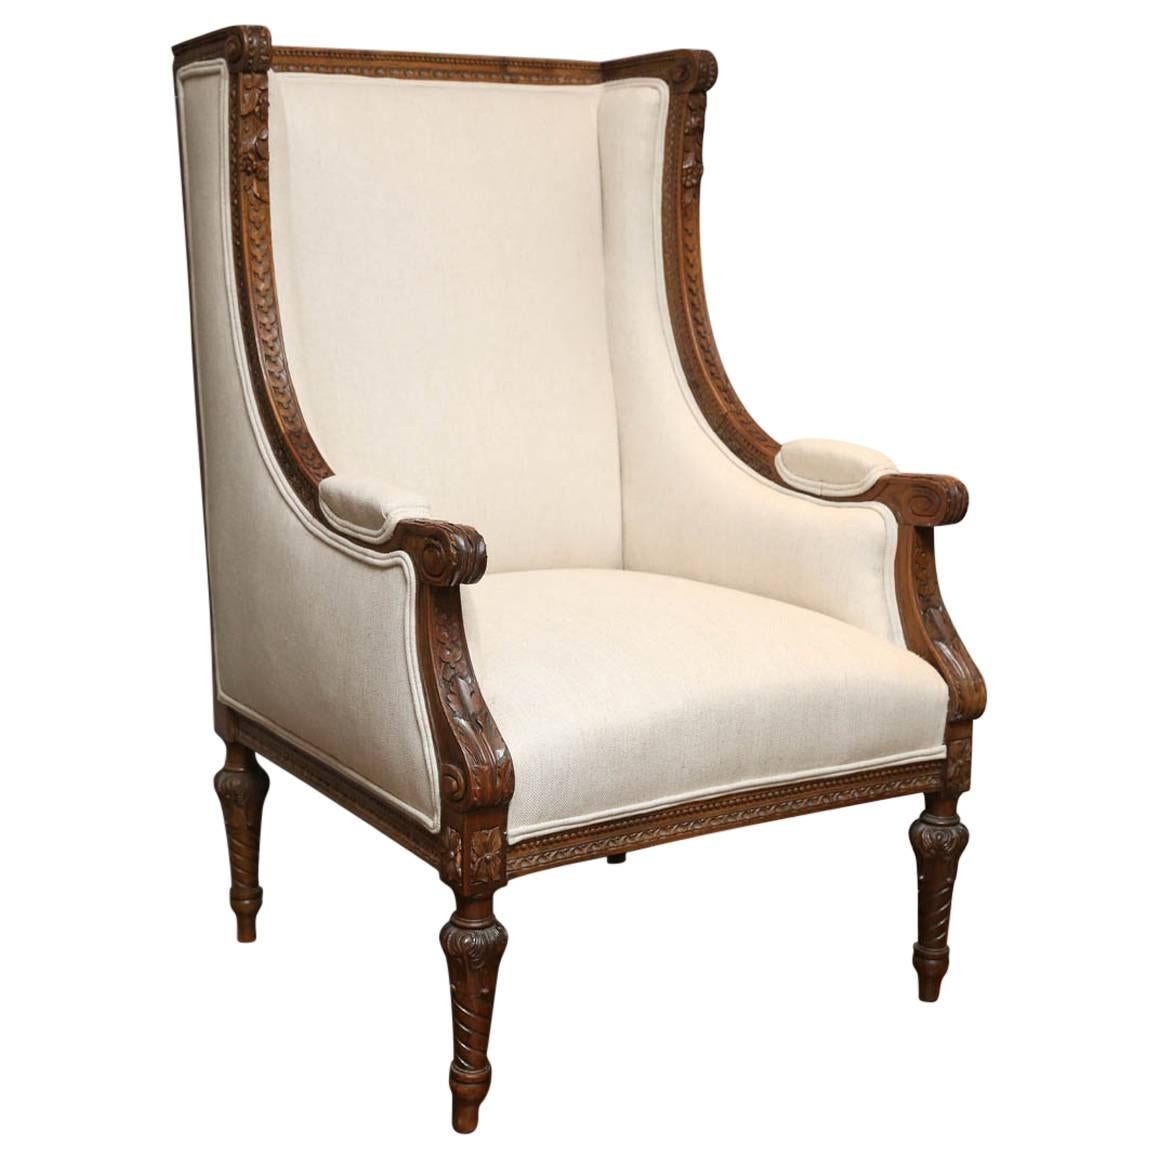 19th Century French Louis XVI Style Wing Chairs For Sale